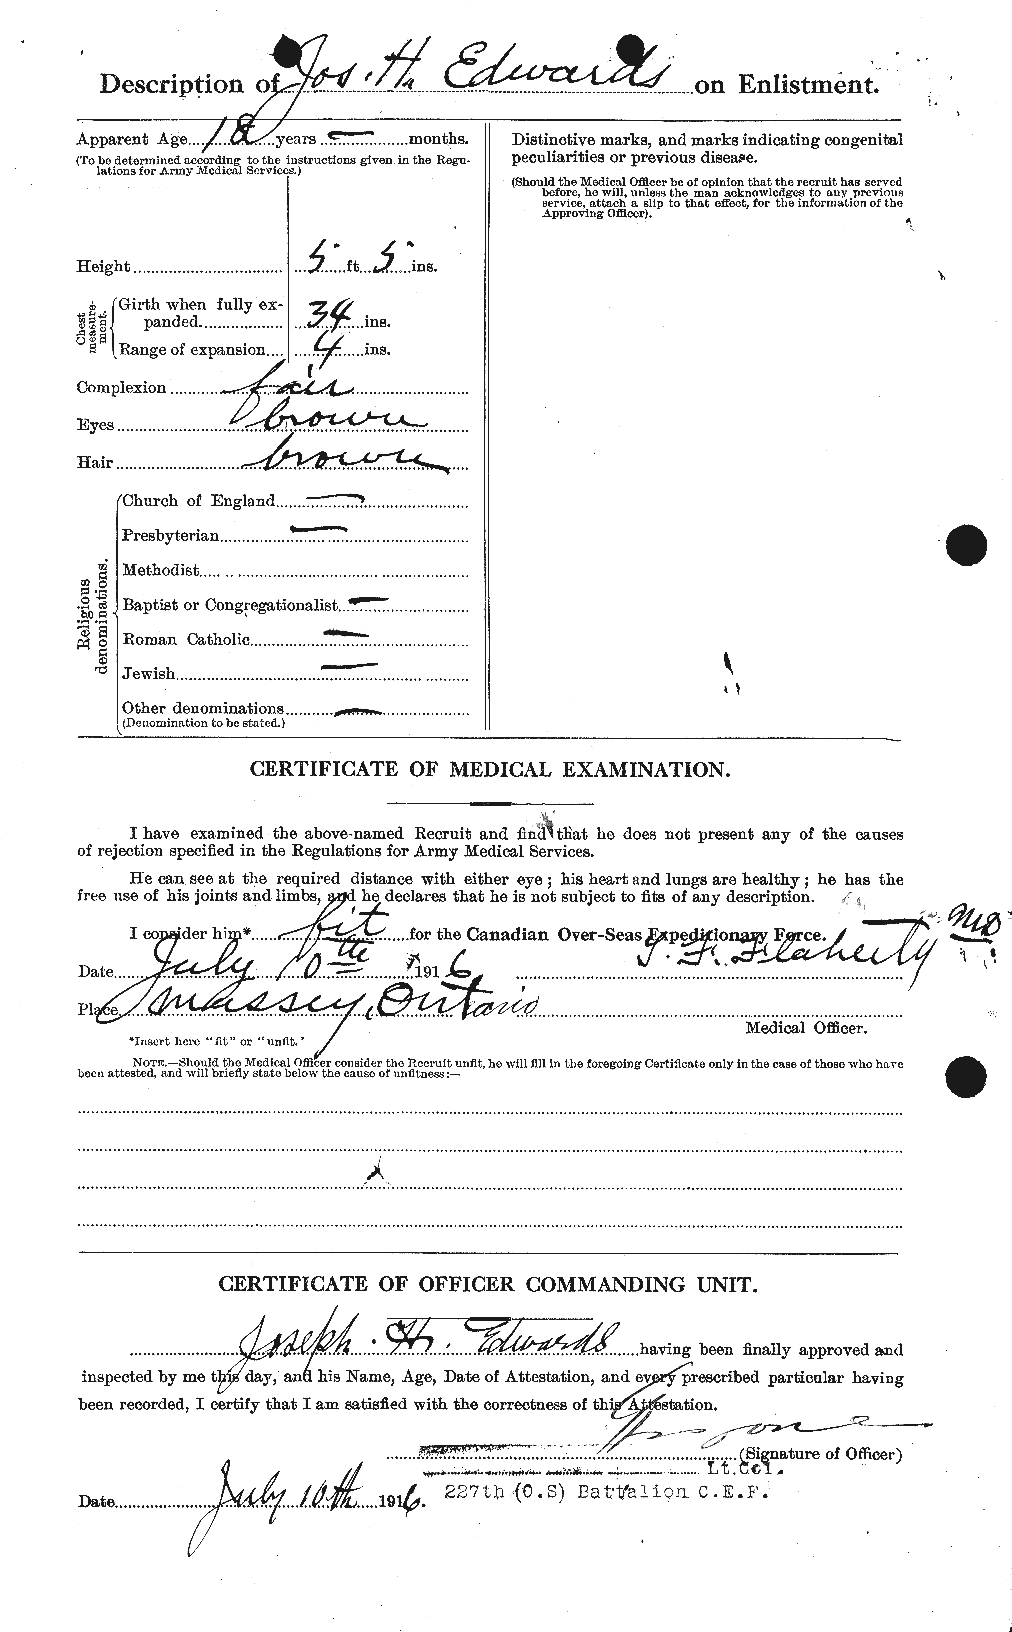 Personnel Records of the First World War - CEF 310181b